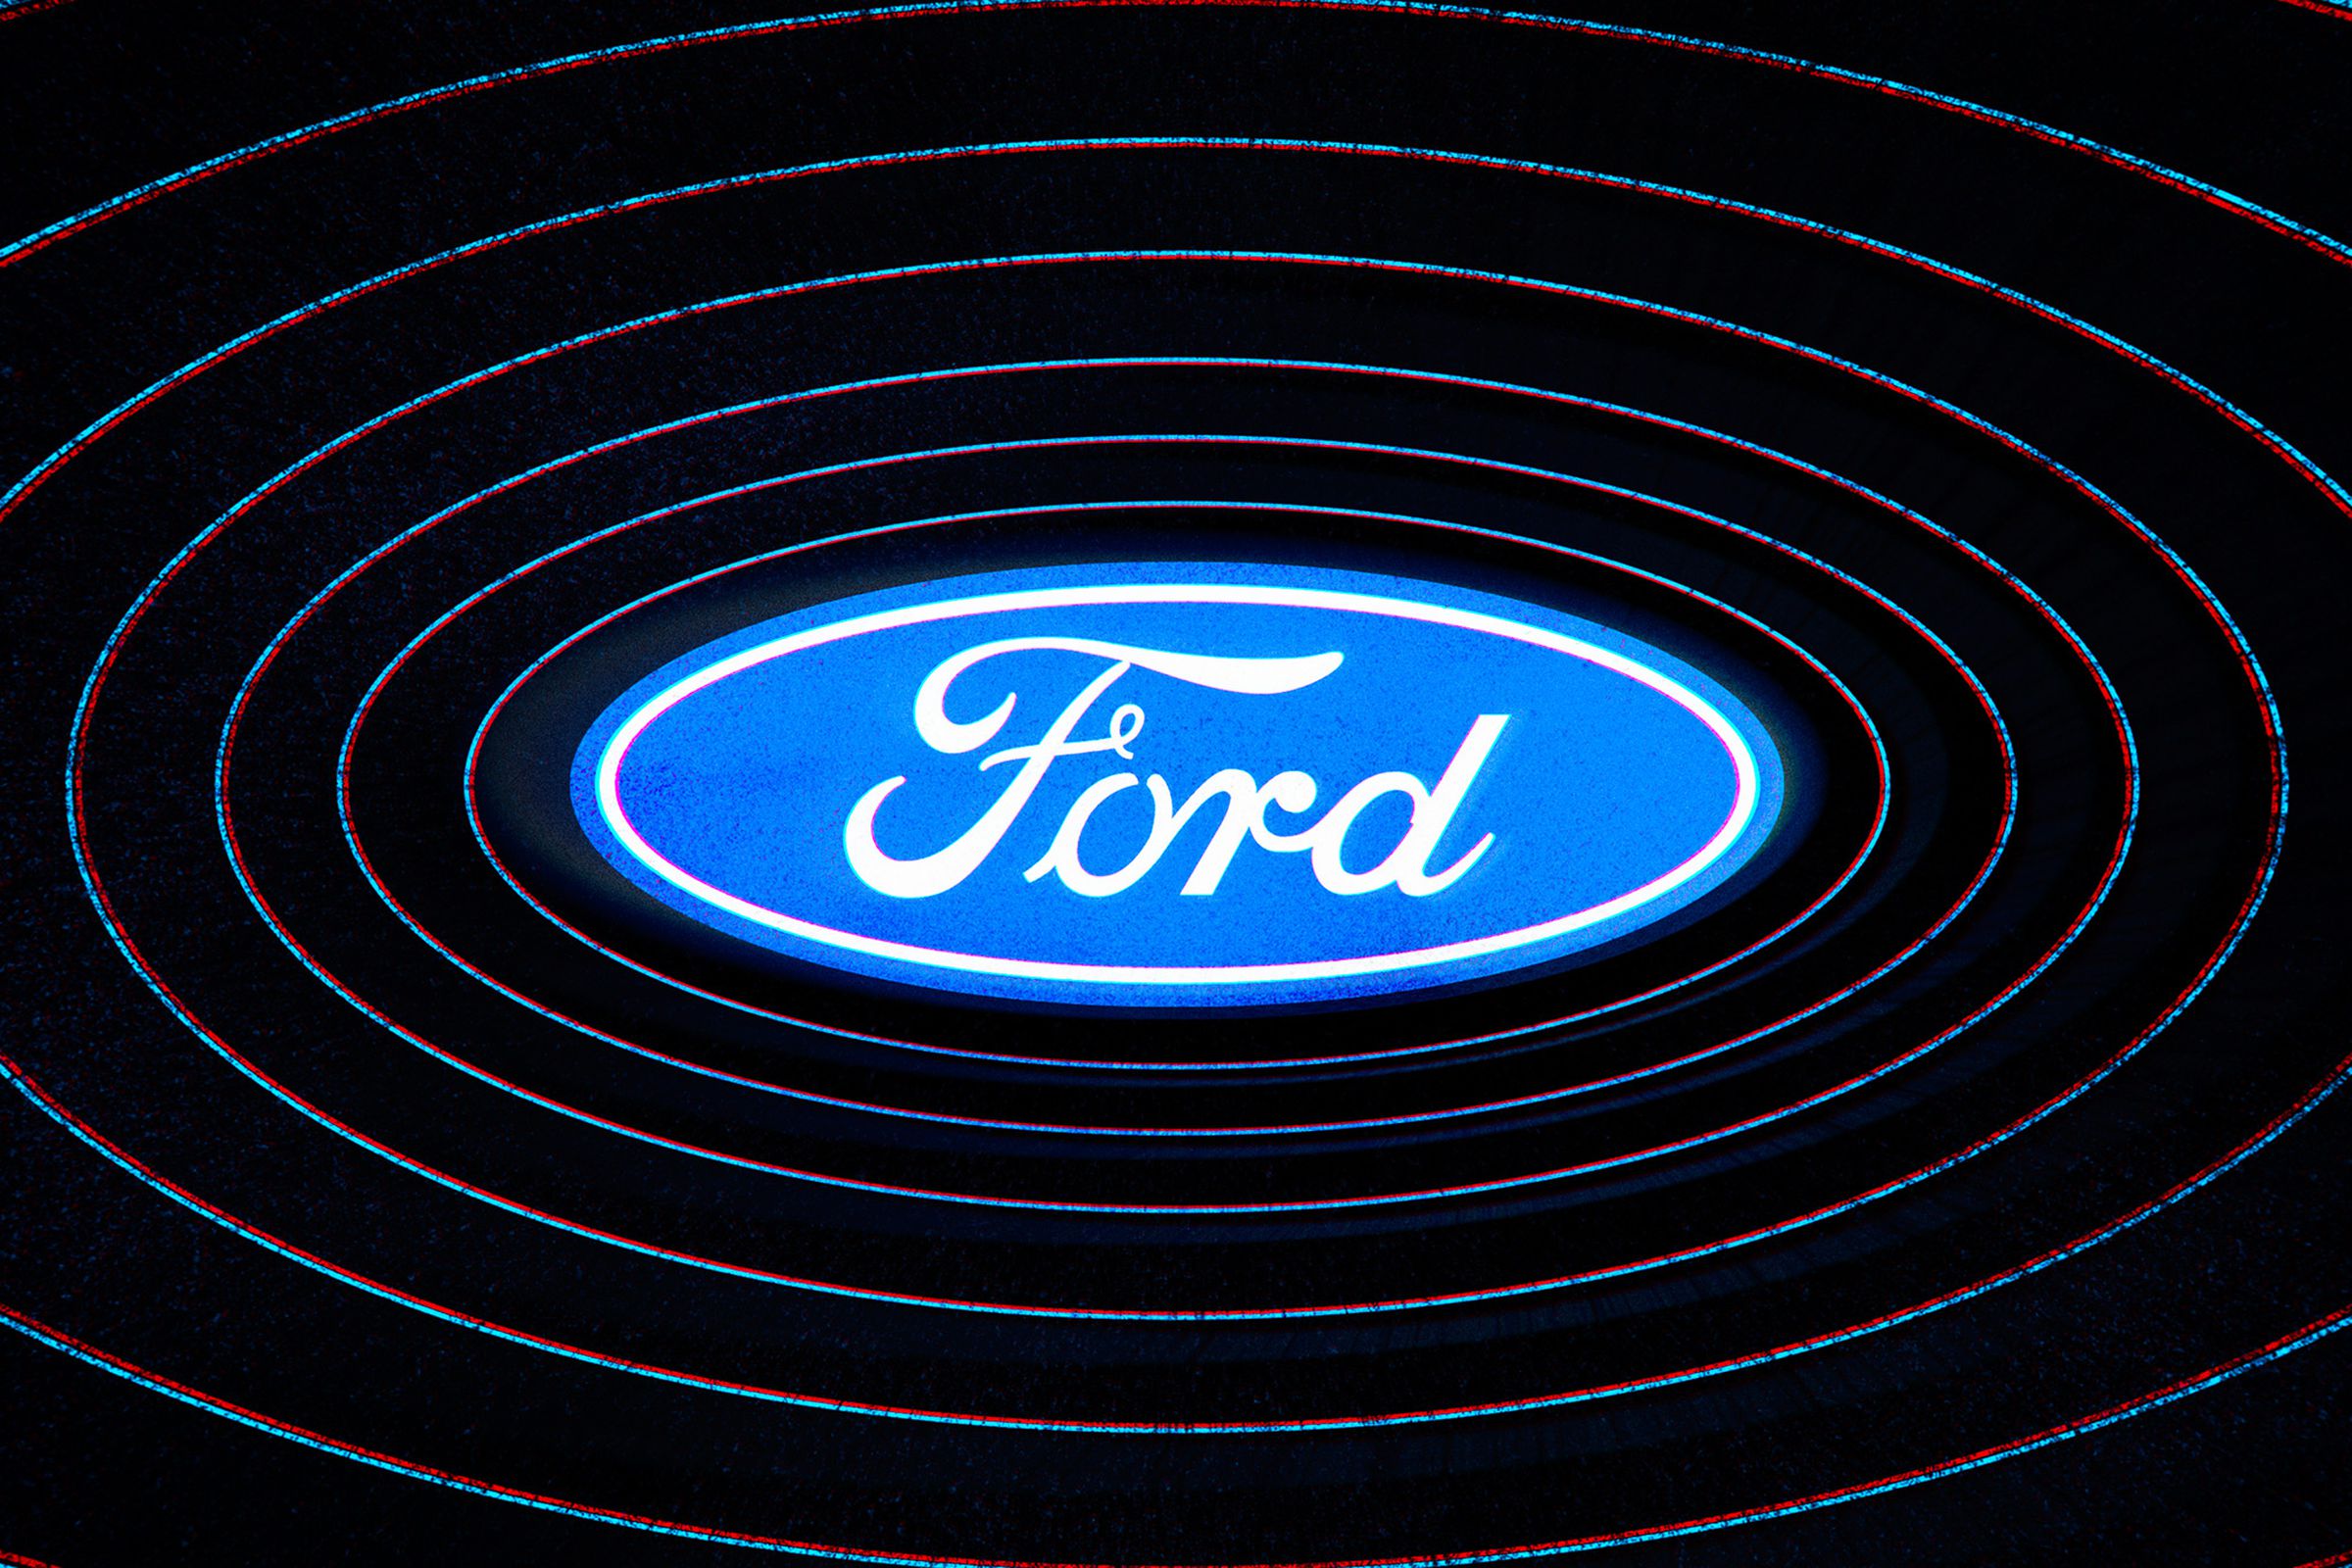 GM is suing Ford over the BlueCruise name for its hands-free driving system